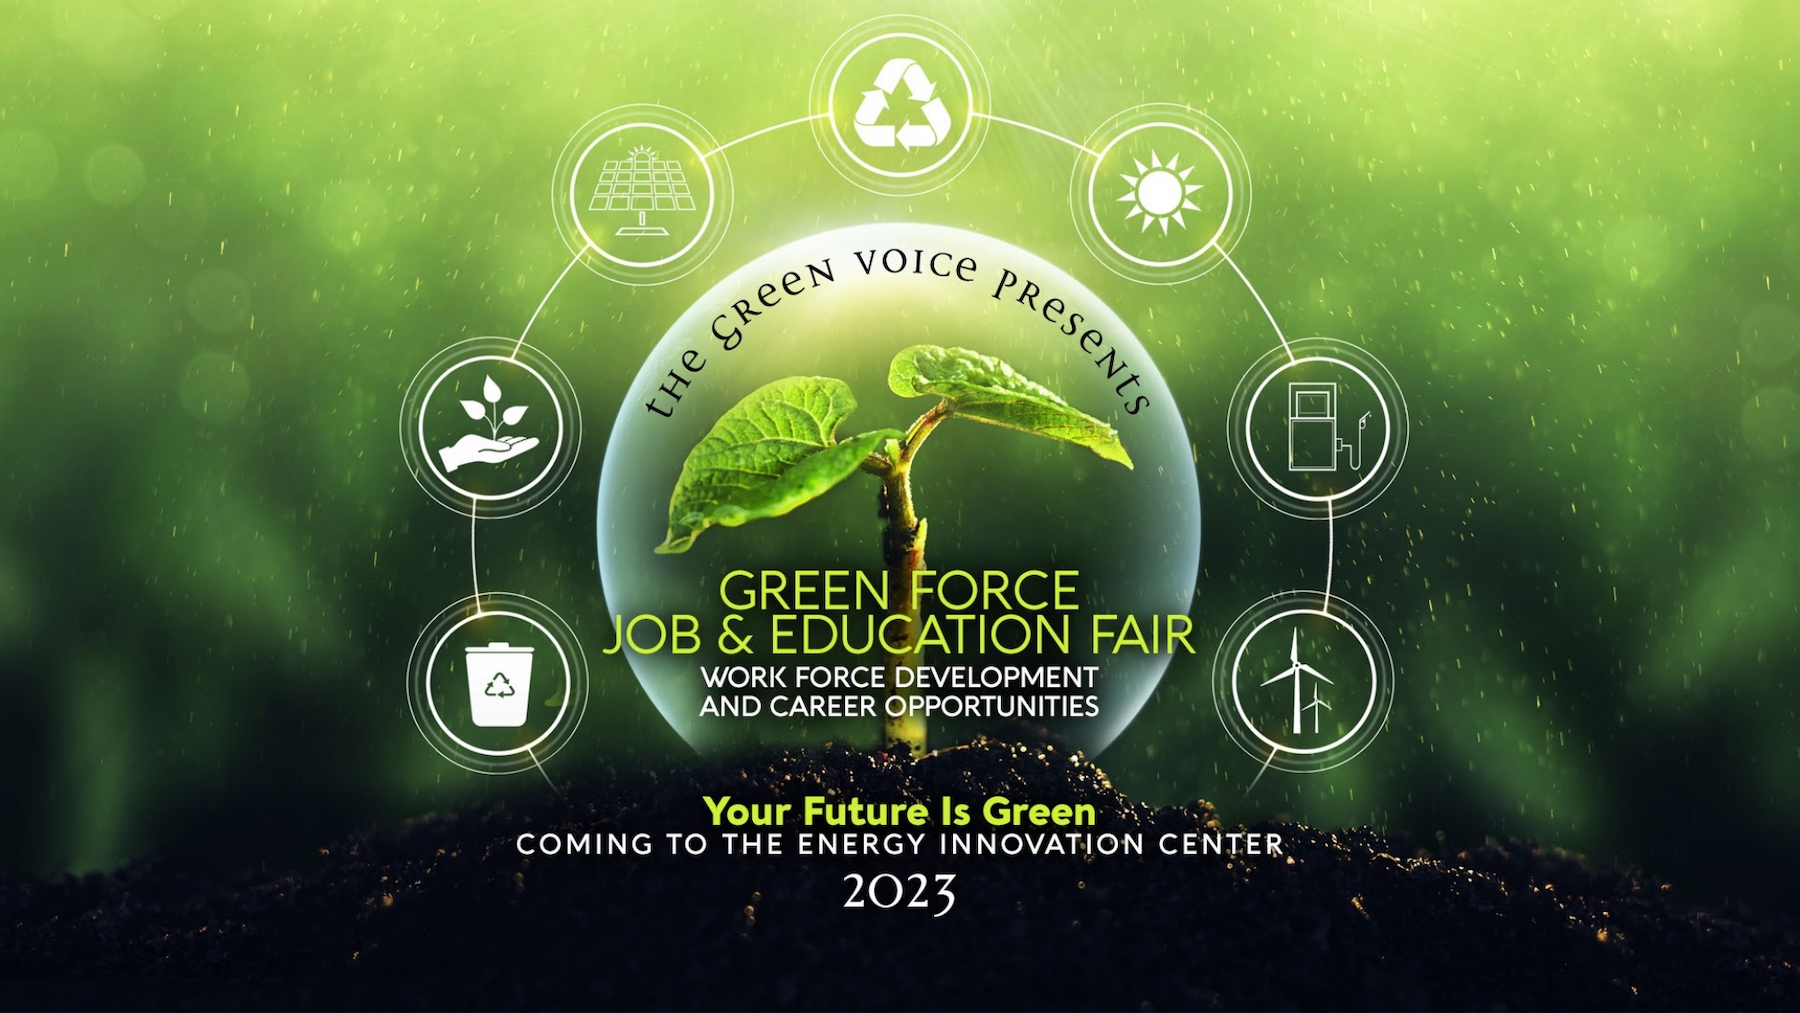 The Green Voice Presents Green Force Job & Education Fair | October 2023 Join us at the Energy Innovation Center for the Green Voice Job & Education Fair, filled with work force development information and career opportunities. Stay tuned for more details.